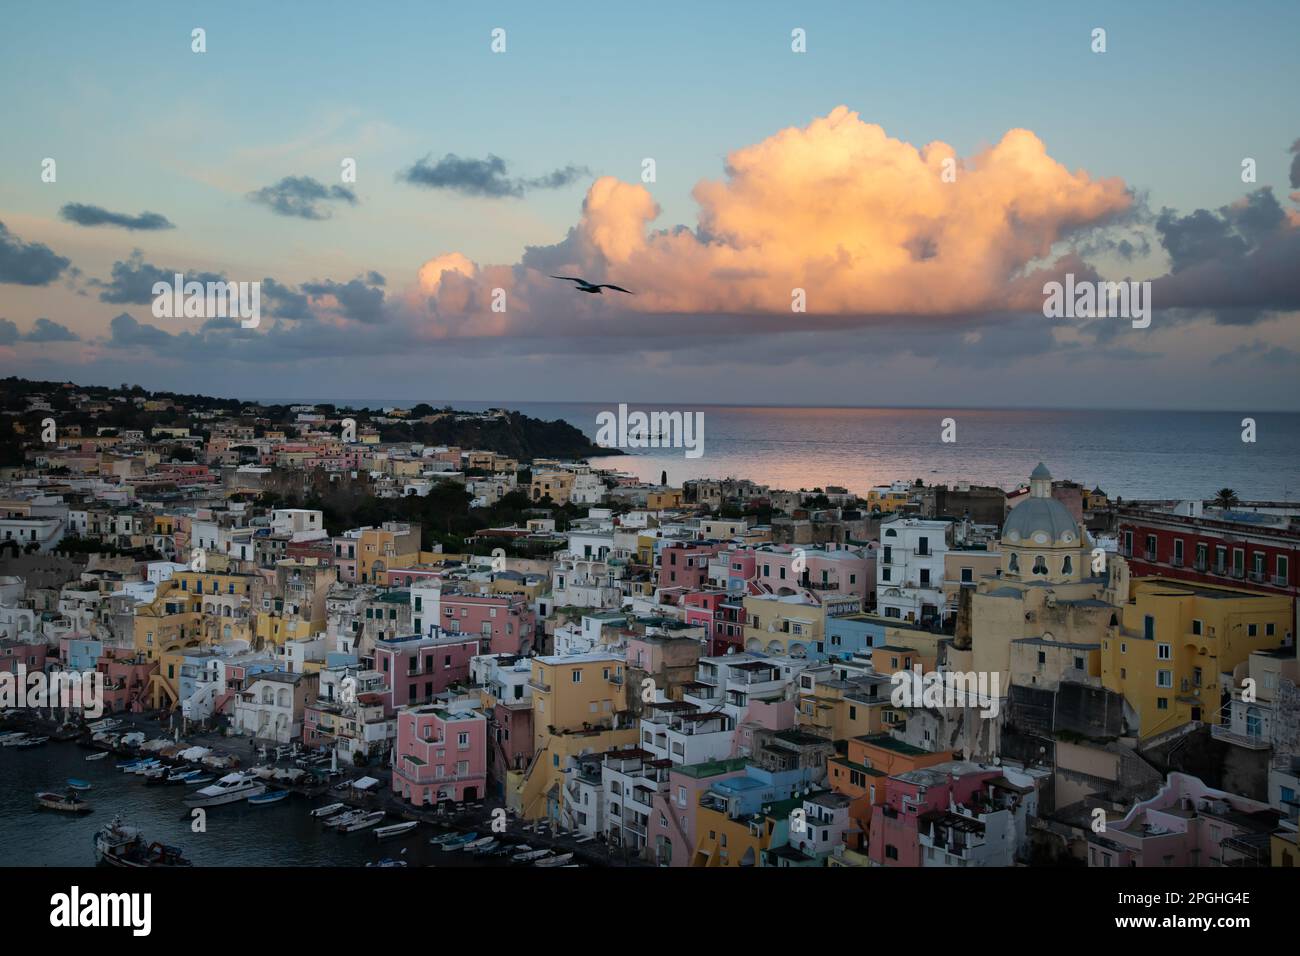 View of the Port of Corricella with lots of colorful houses in the sunset in Procida Island, Italy. Stock Photo